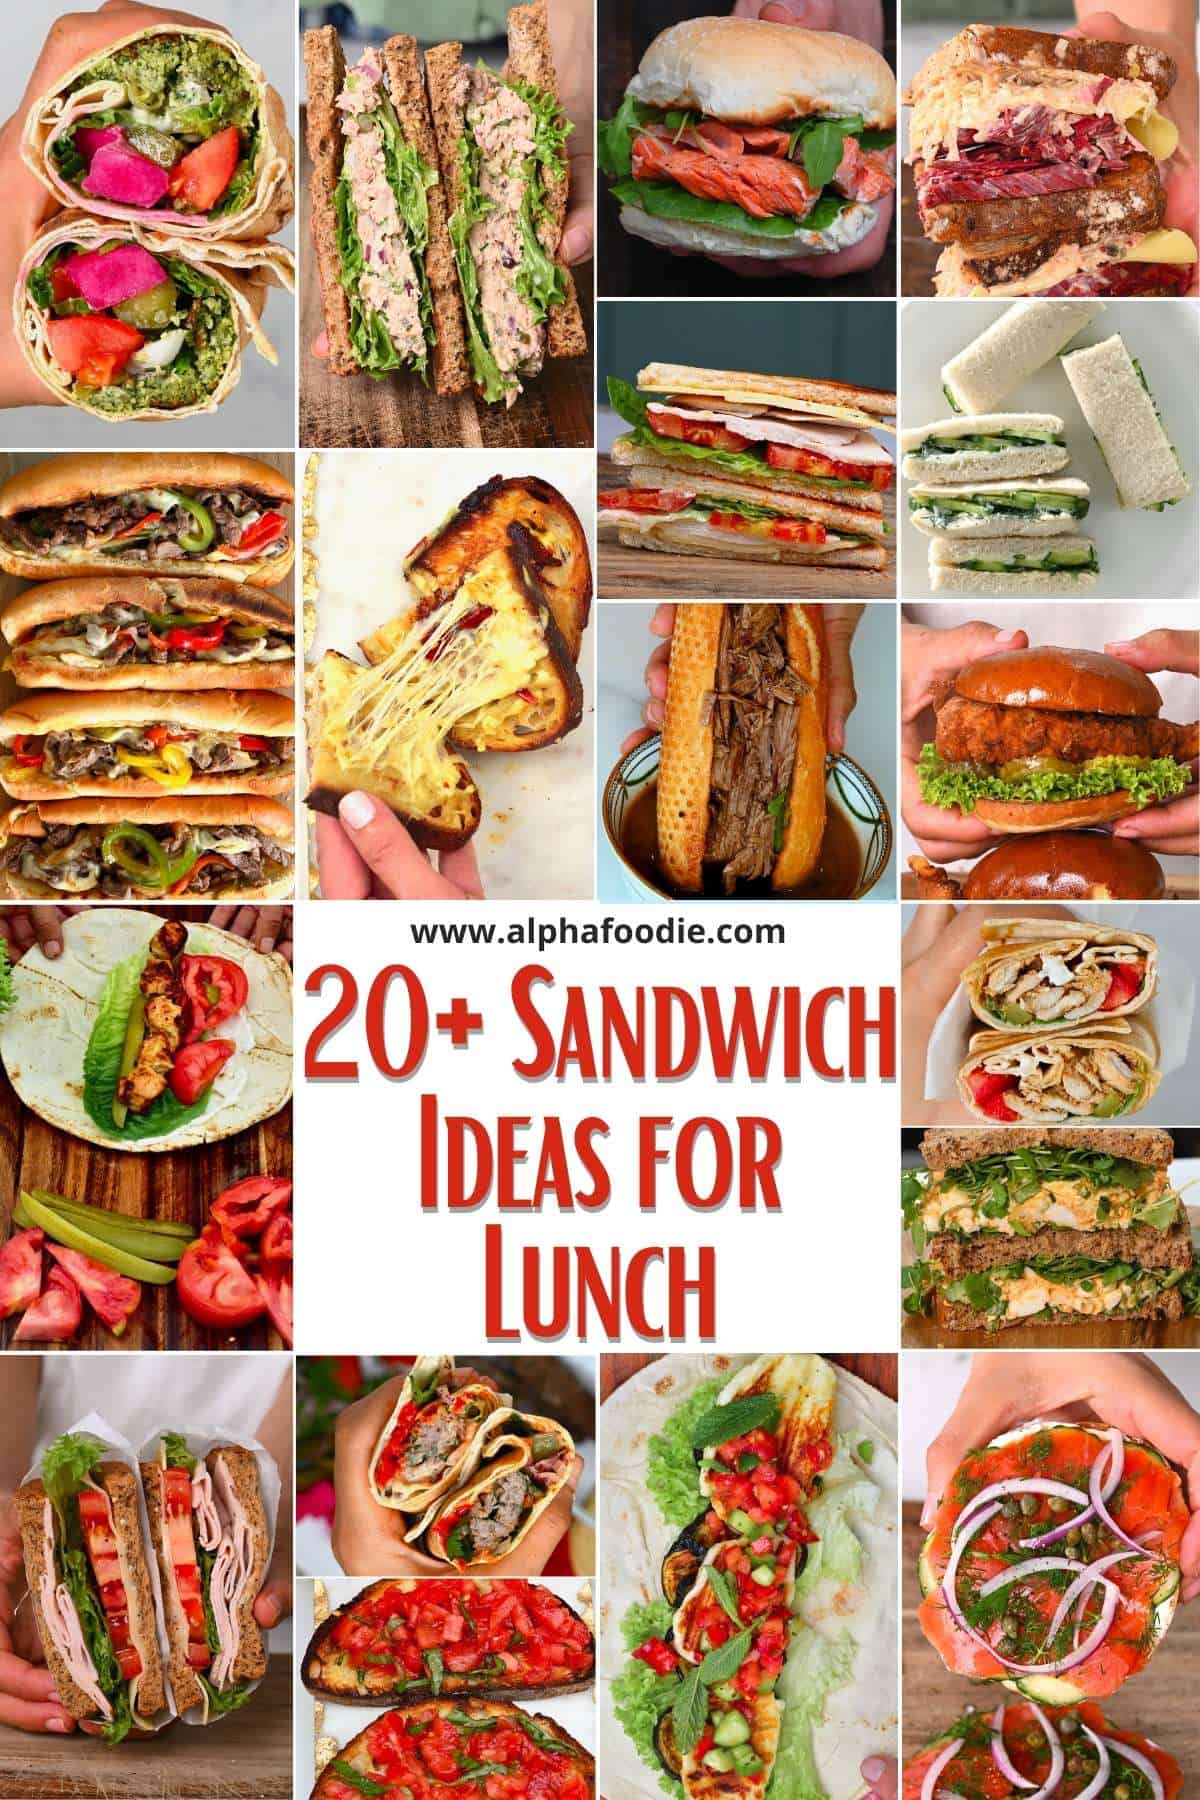 20+ Delicious Sandwich Ideas for Lunch - Alphafoodie